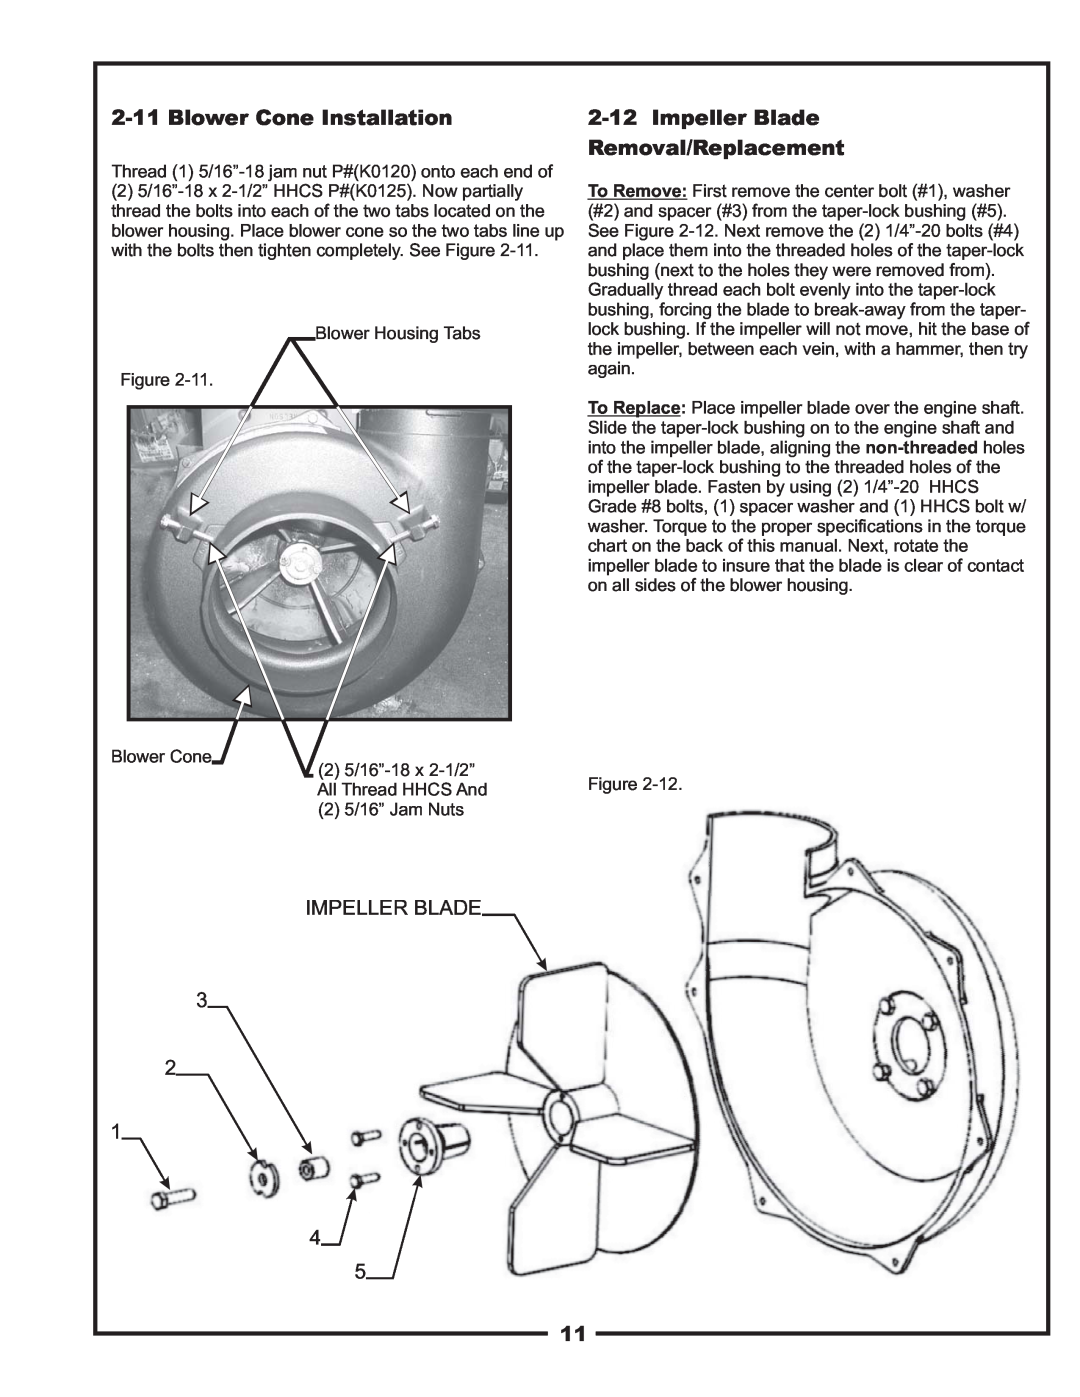 Scag Power Equipment 37621219, 37621220 manual Blower Cone Installation, Impeller Blade Removal/Replacement 